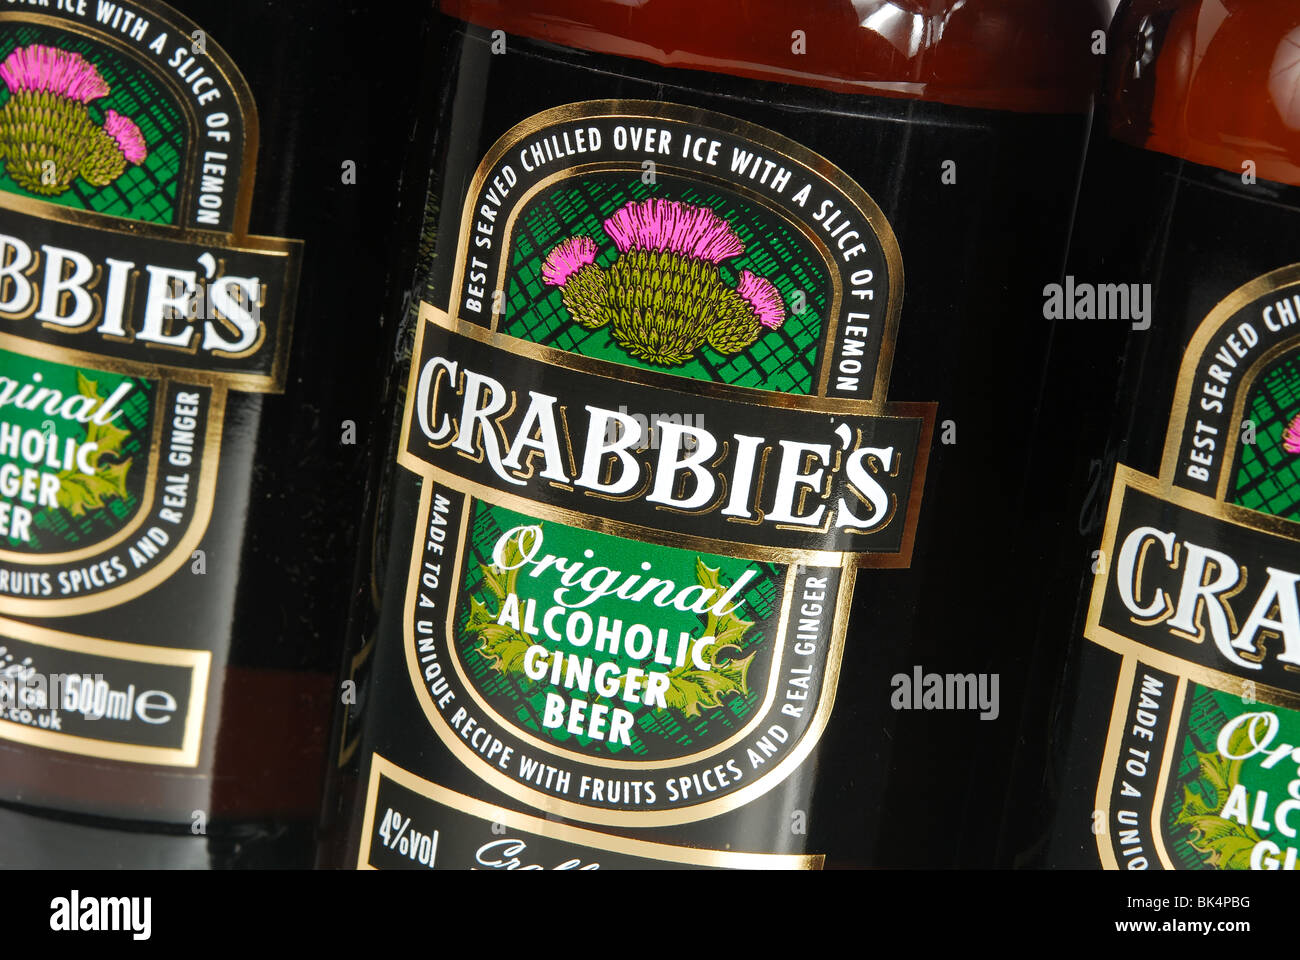 A close-up image of bottles of Crabbie's Original alcoholic ginger beer. Stock Photo